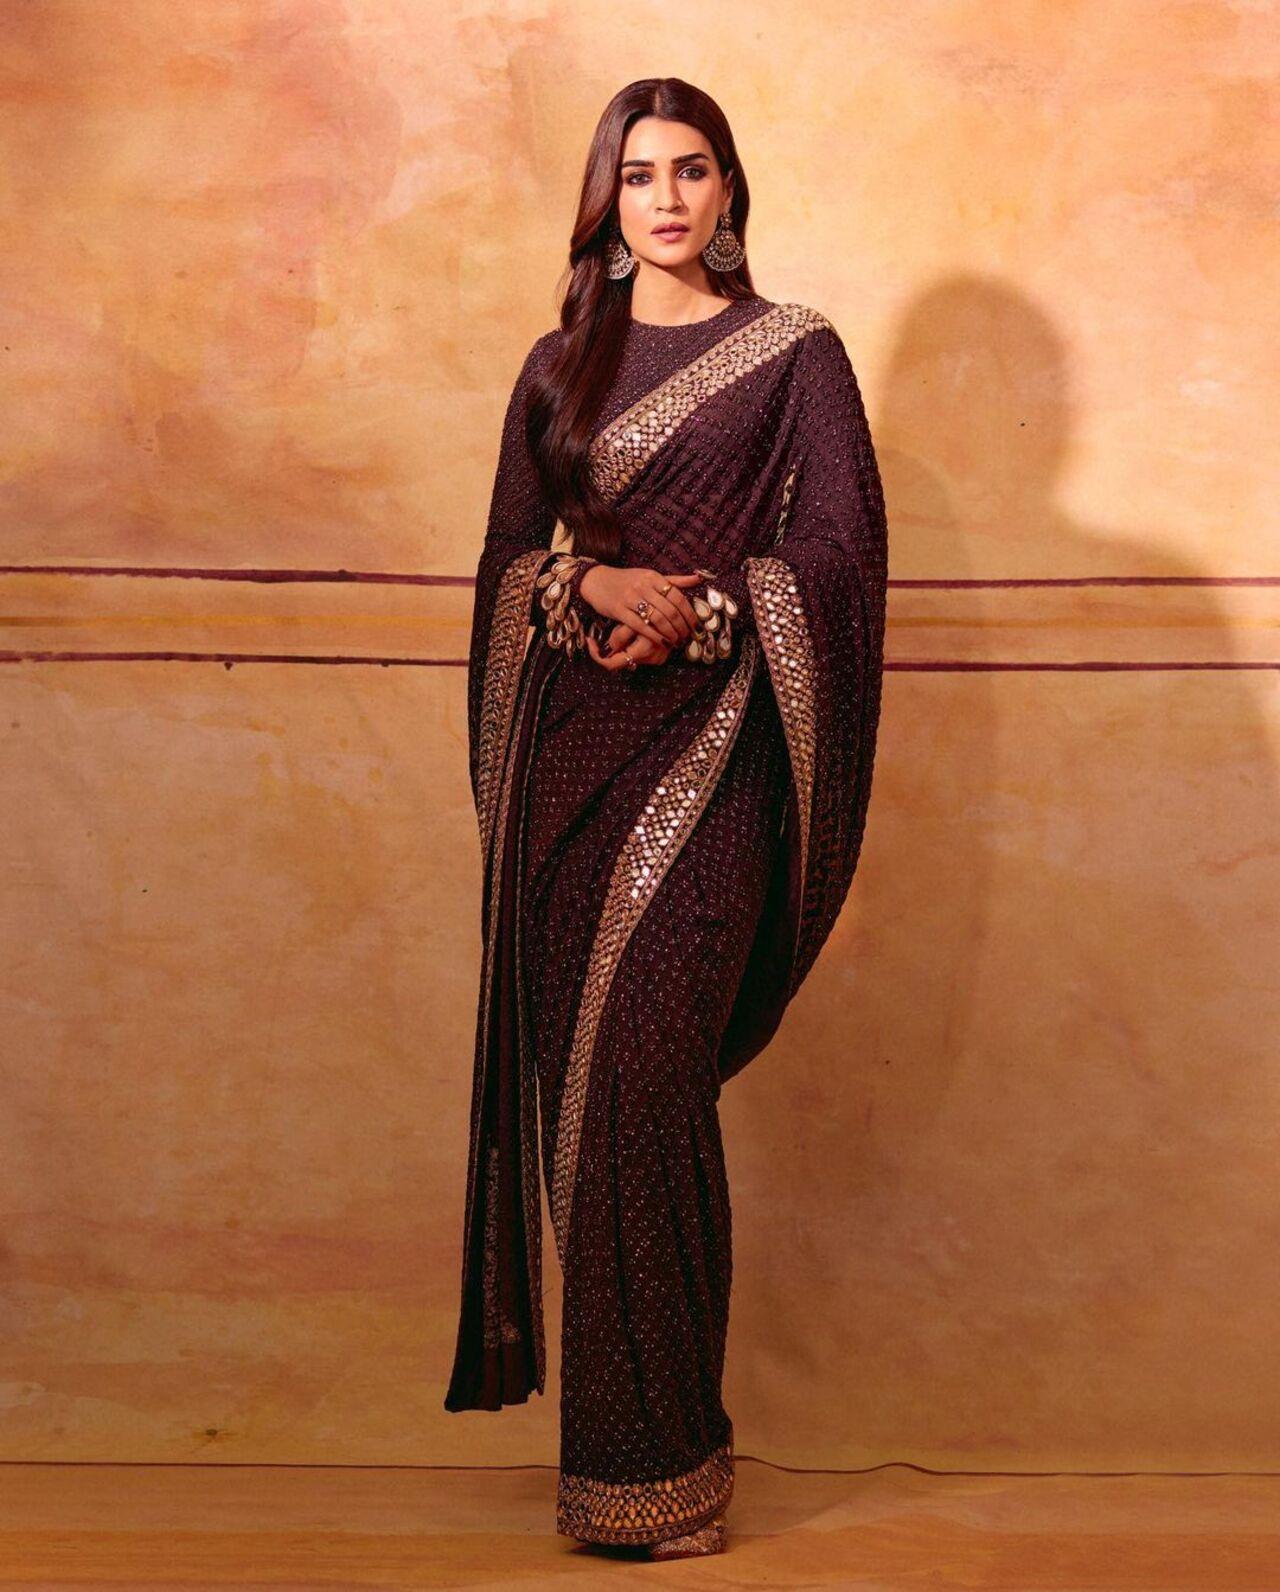 The actress opted for full sleeves matching blouse to pair with her beautiful saree